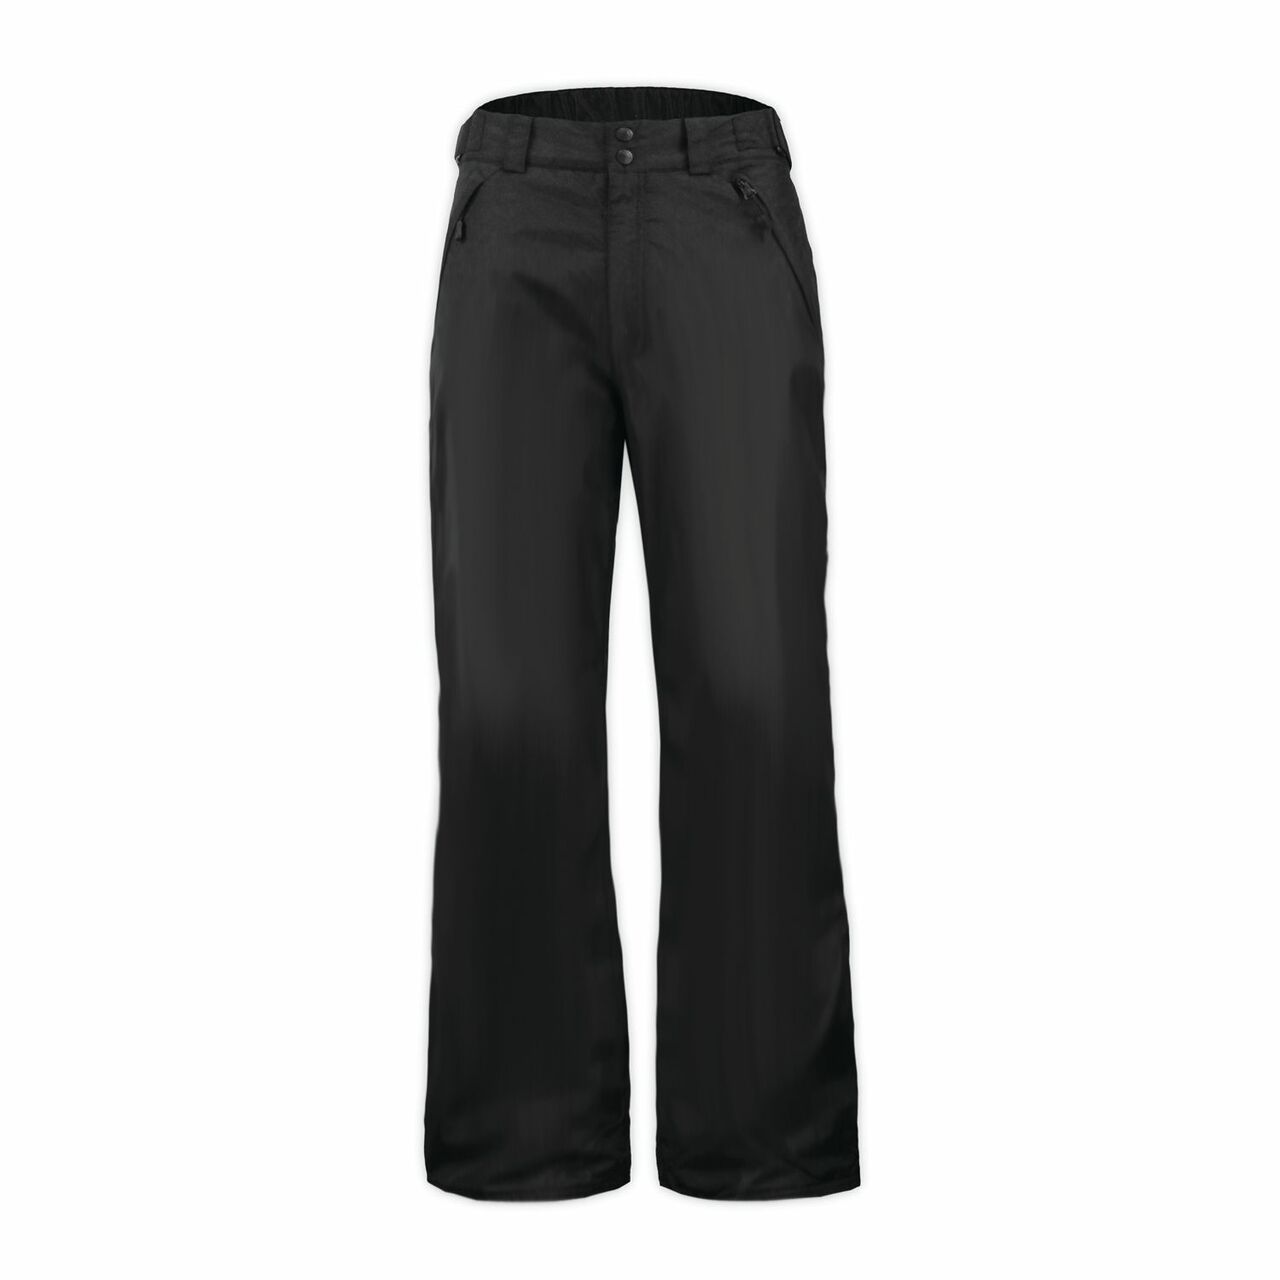 Outdoor Gear Storm Chaser Pant Womens